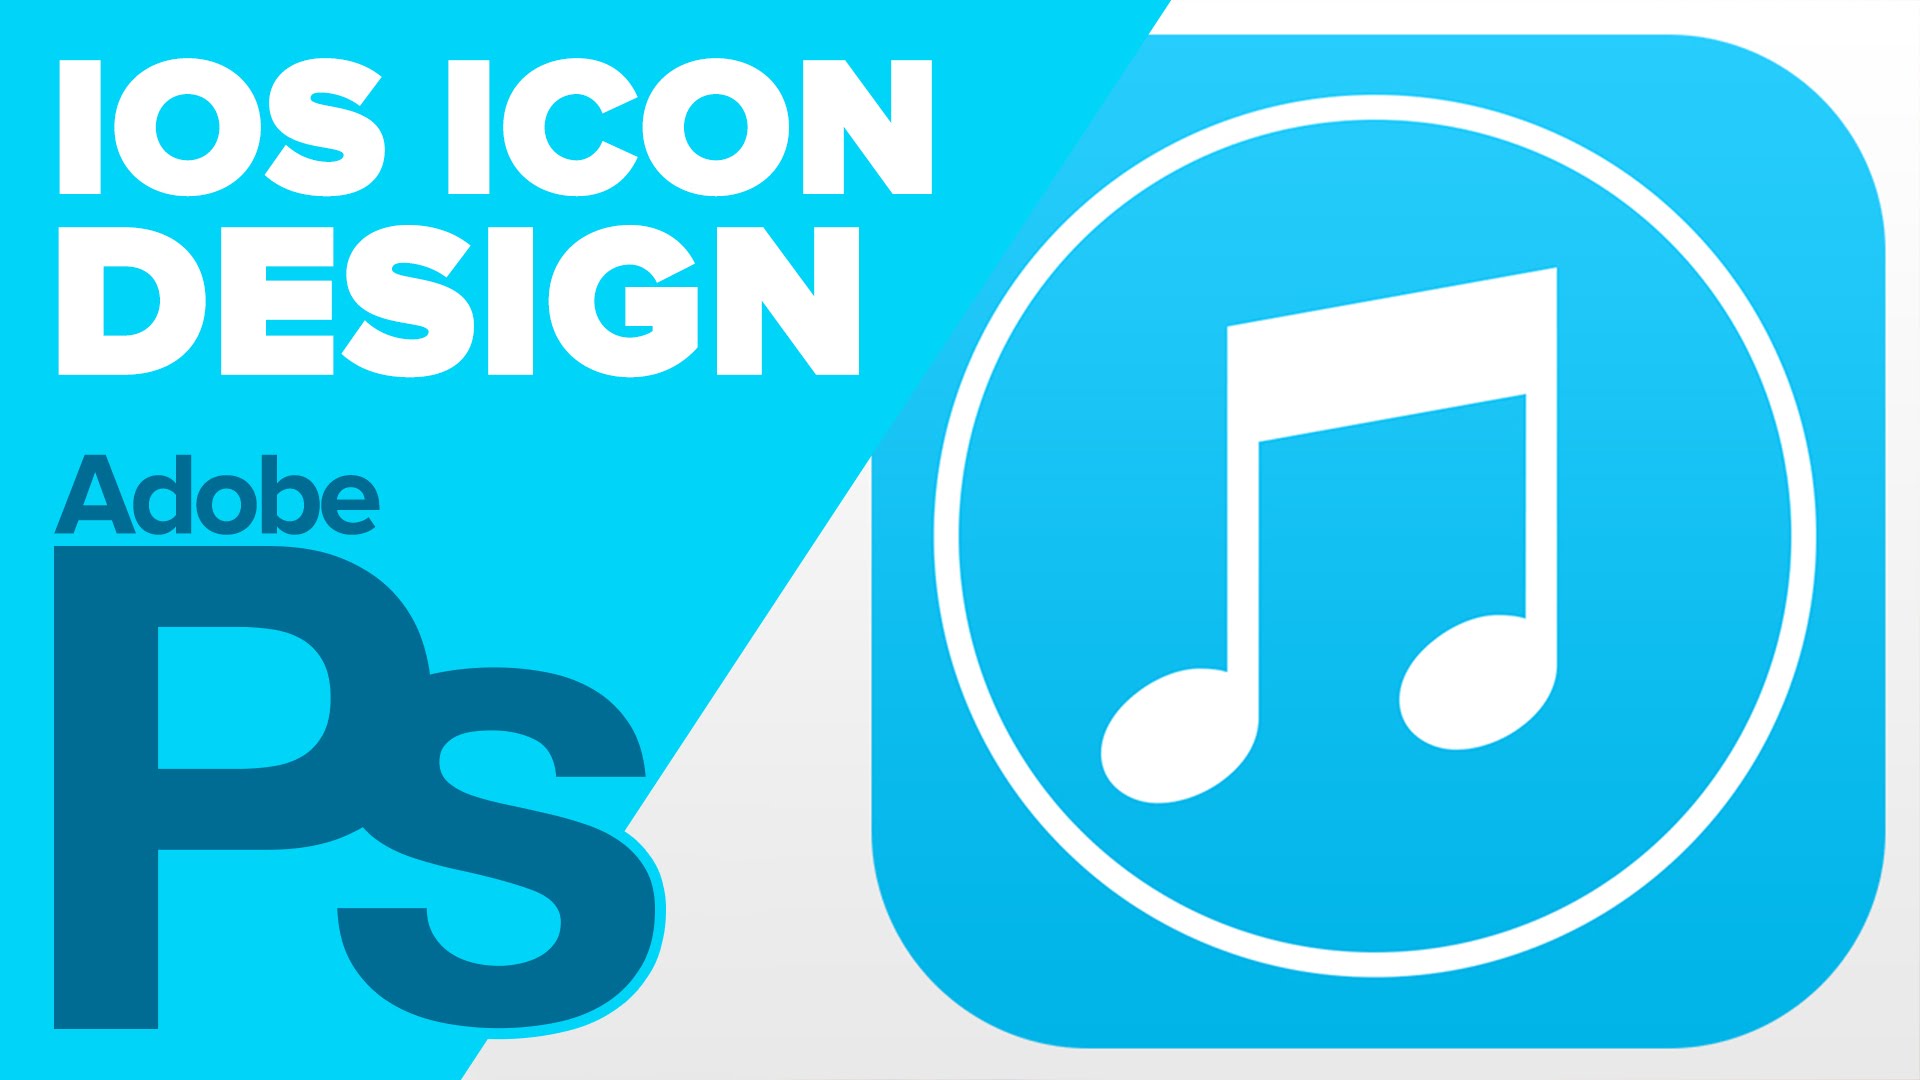 How App Icons Have Changed From iOS 6 To iOS 7